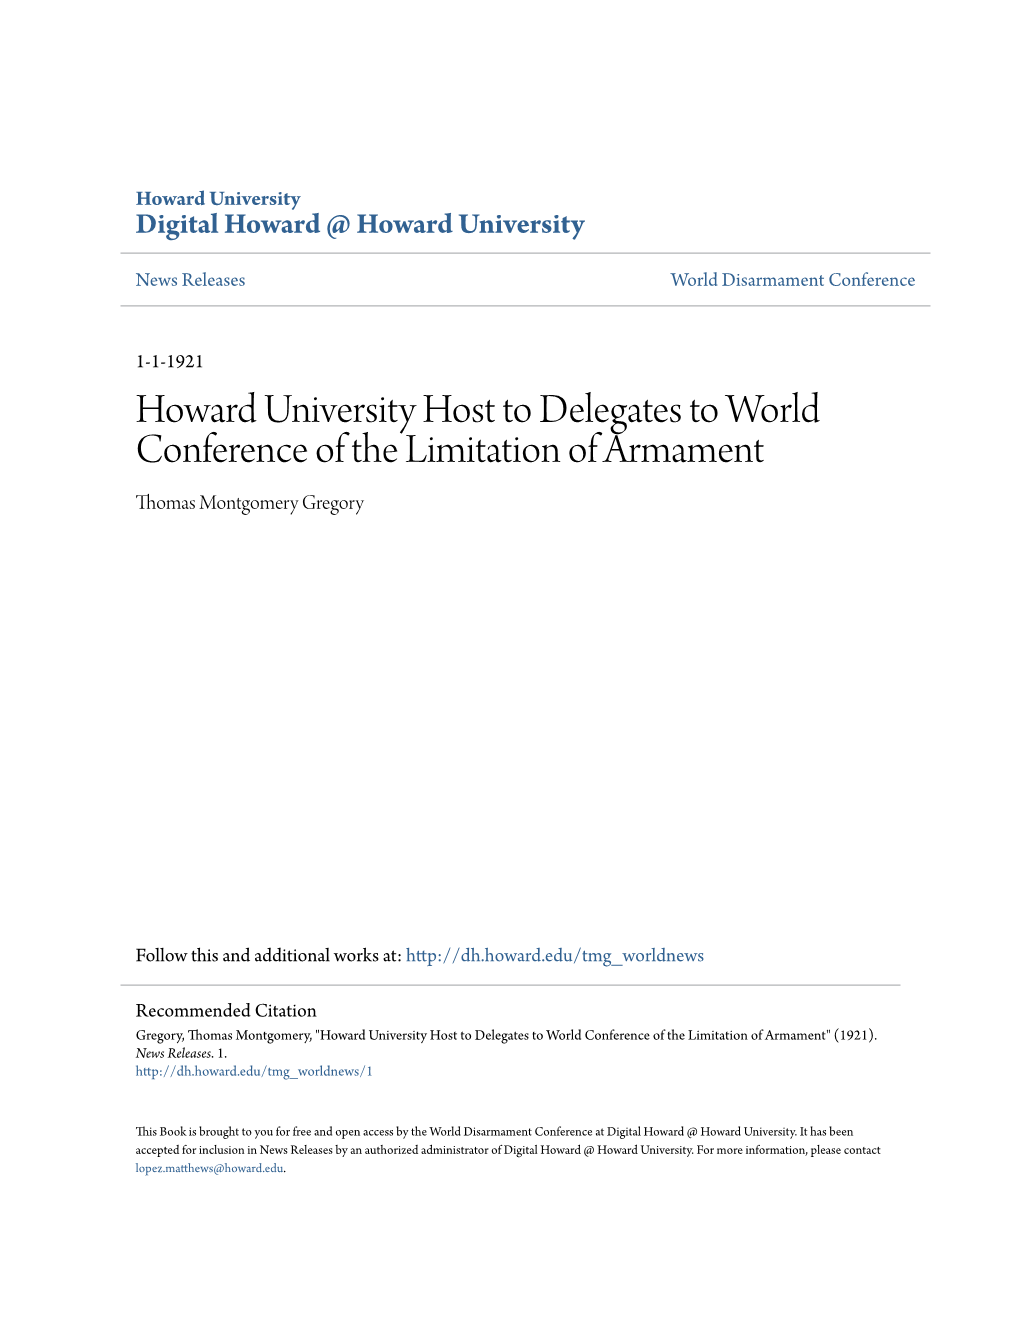 Howard University Host to Delegates to World Conference of the Limitation of Armament Thomas Montgomery Gregory